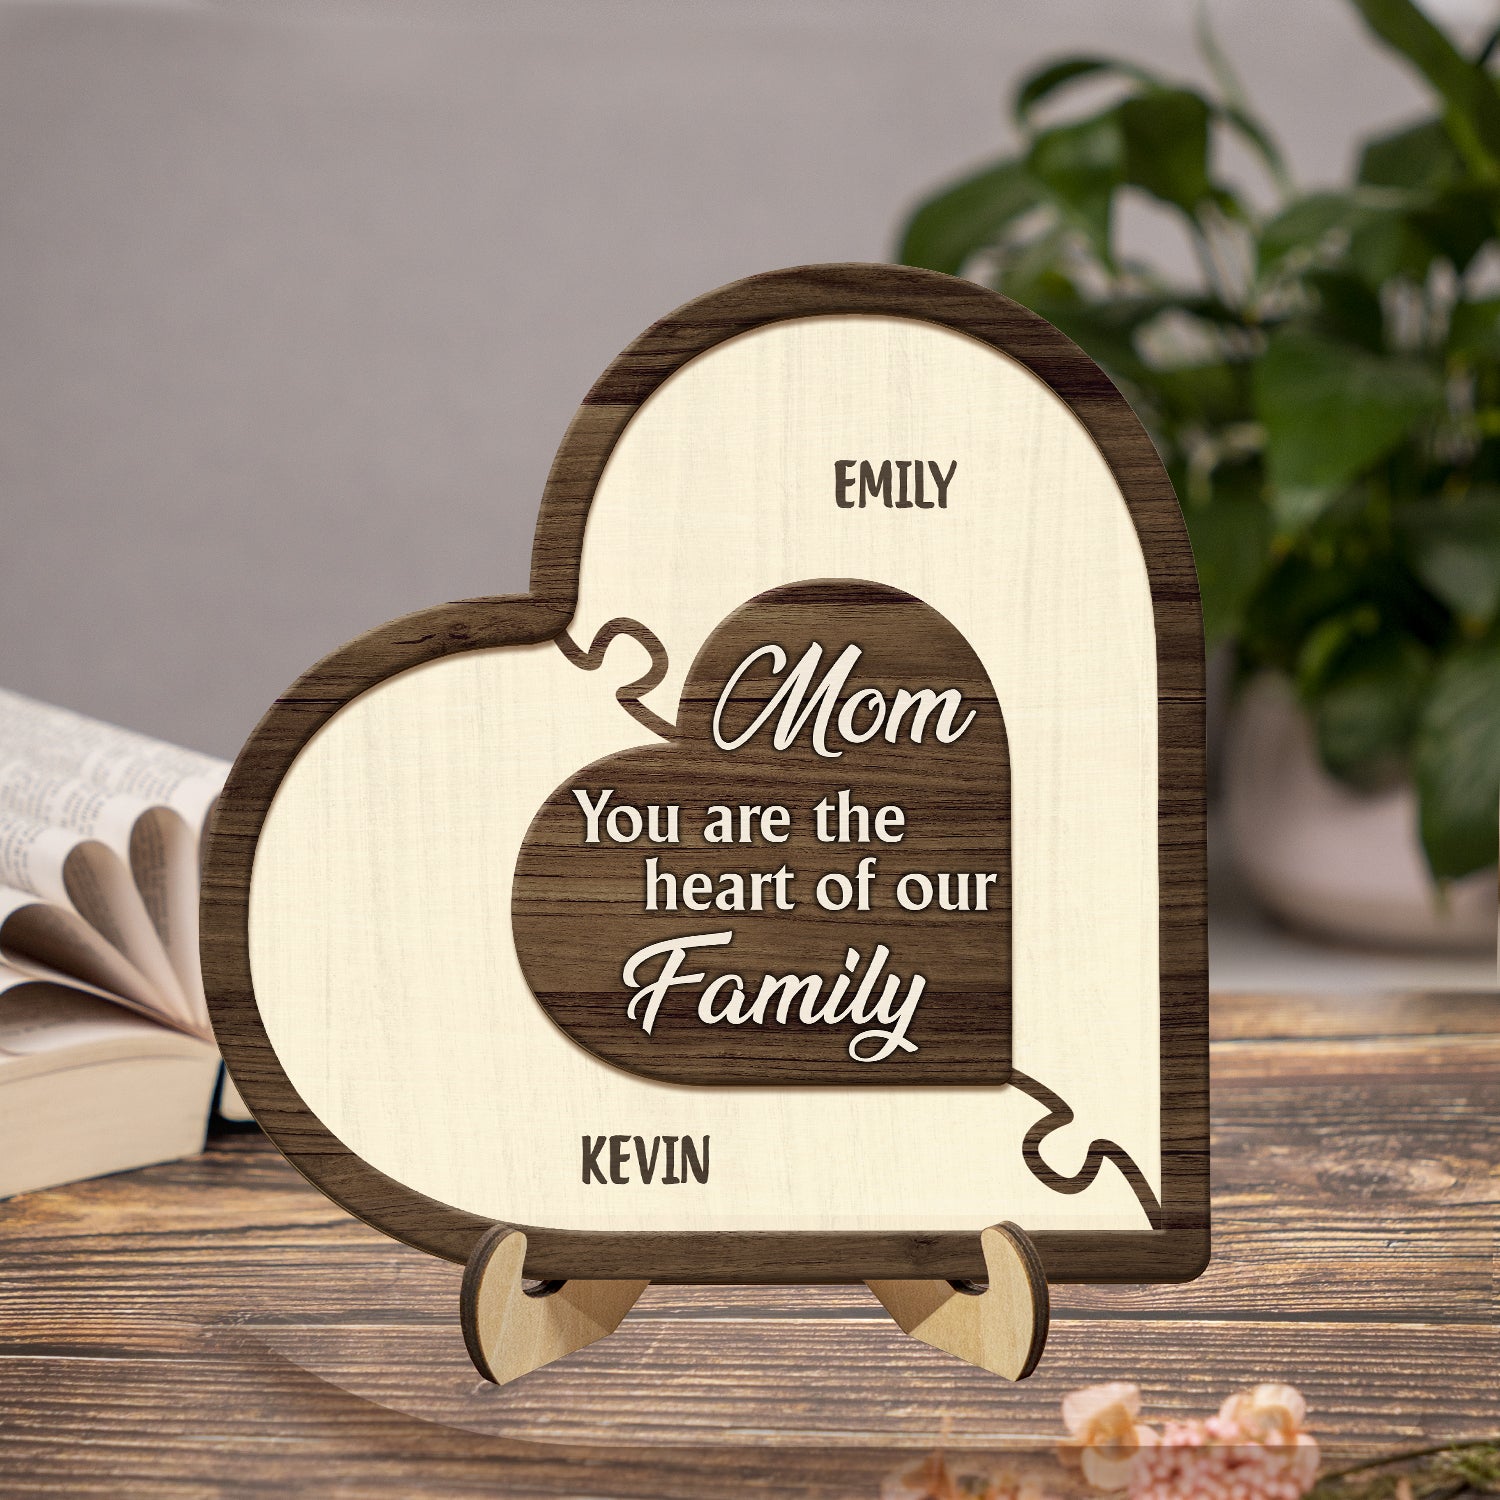 Personalized Wooden Plaque Thankyou Gift for Wife (5x4 inches) - Incredible  Gifts